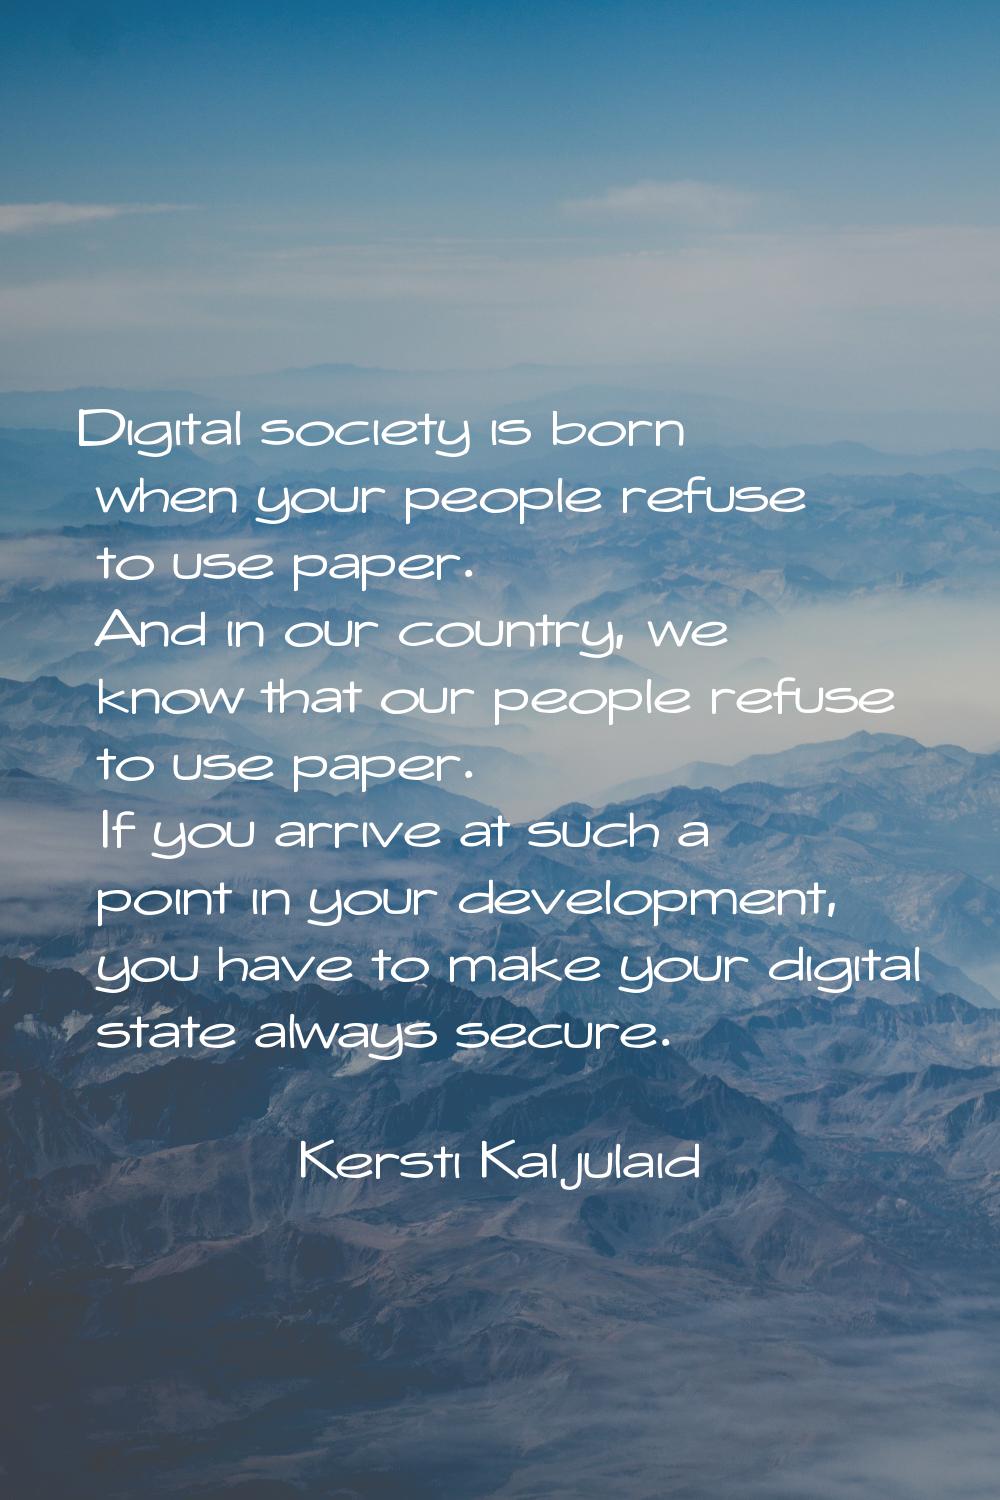 Digital society is born when your people refuse to use paper. And in our country, we know that our 